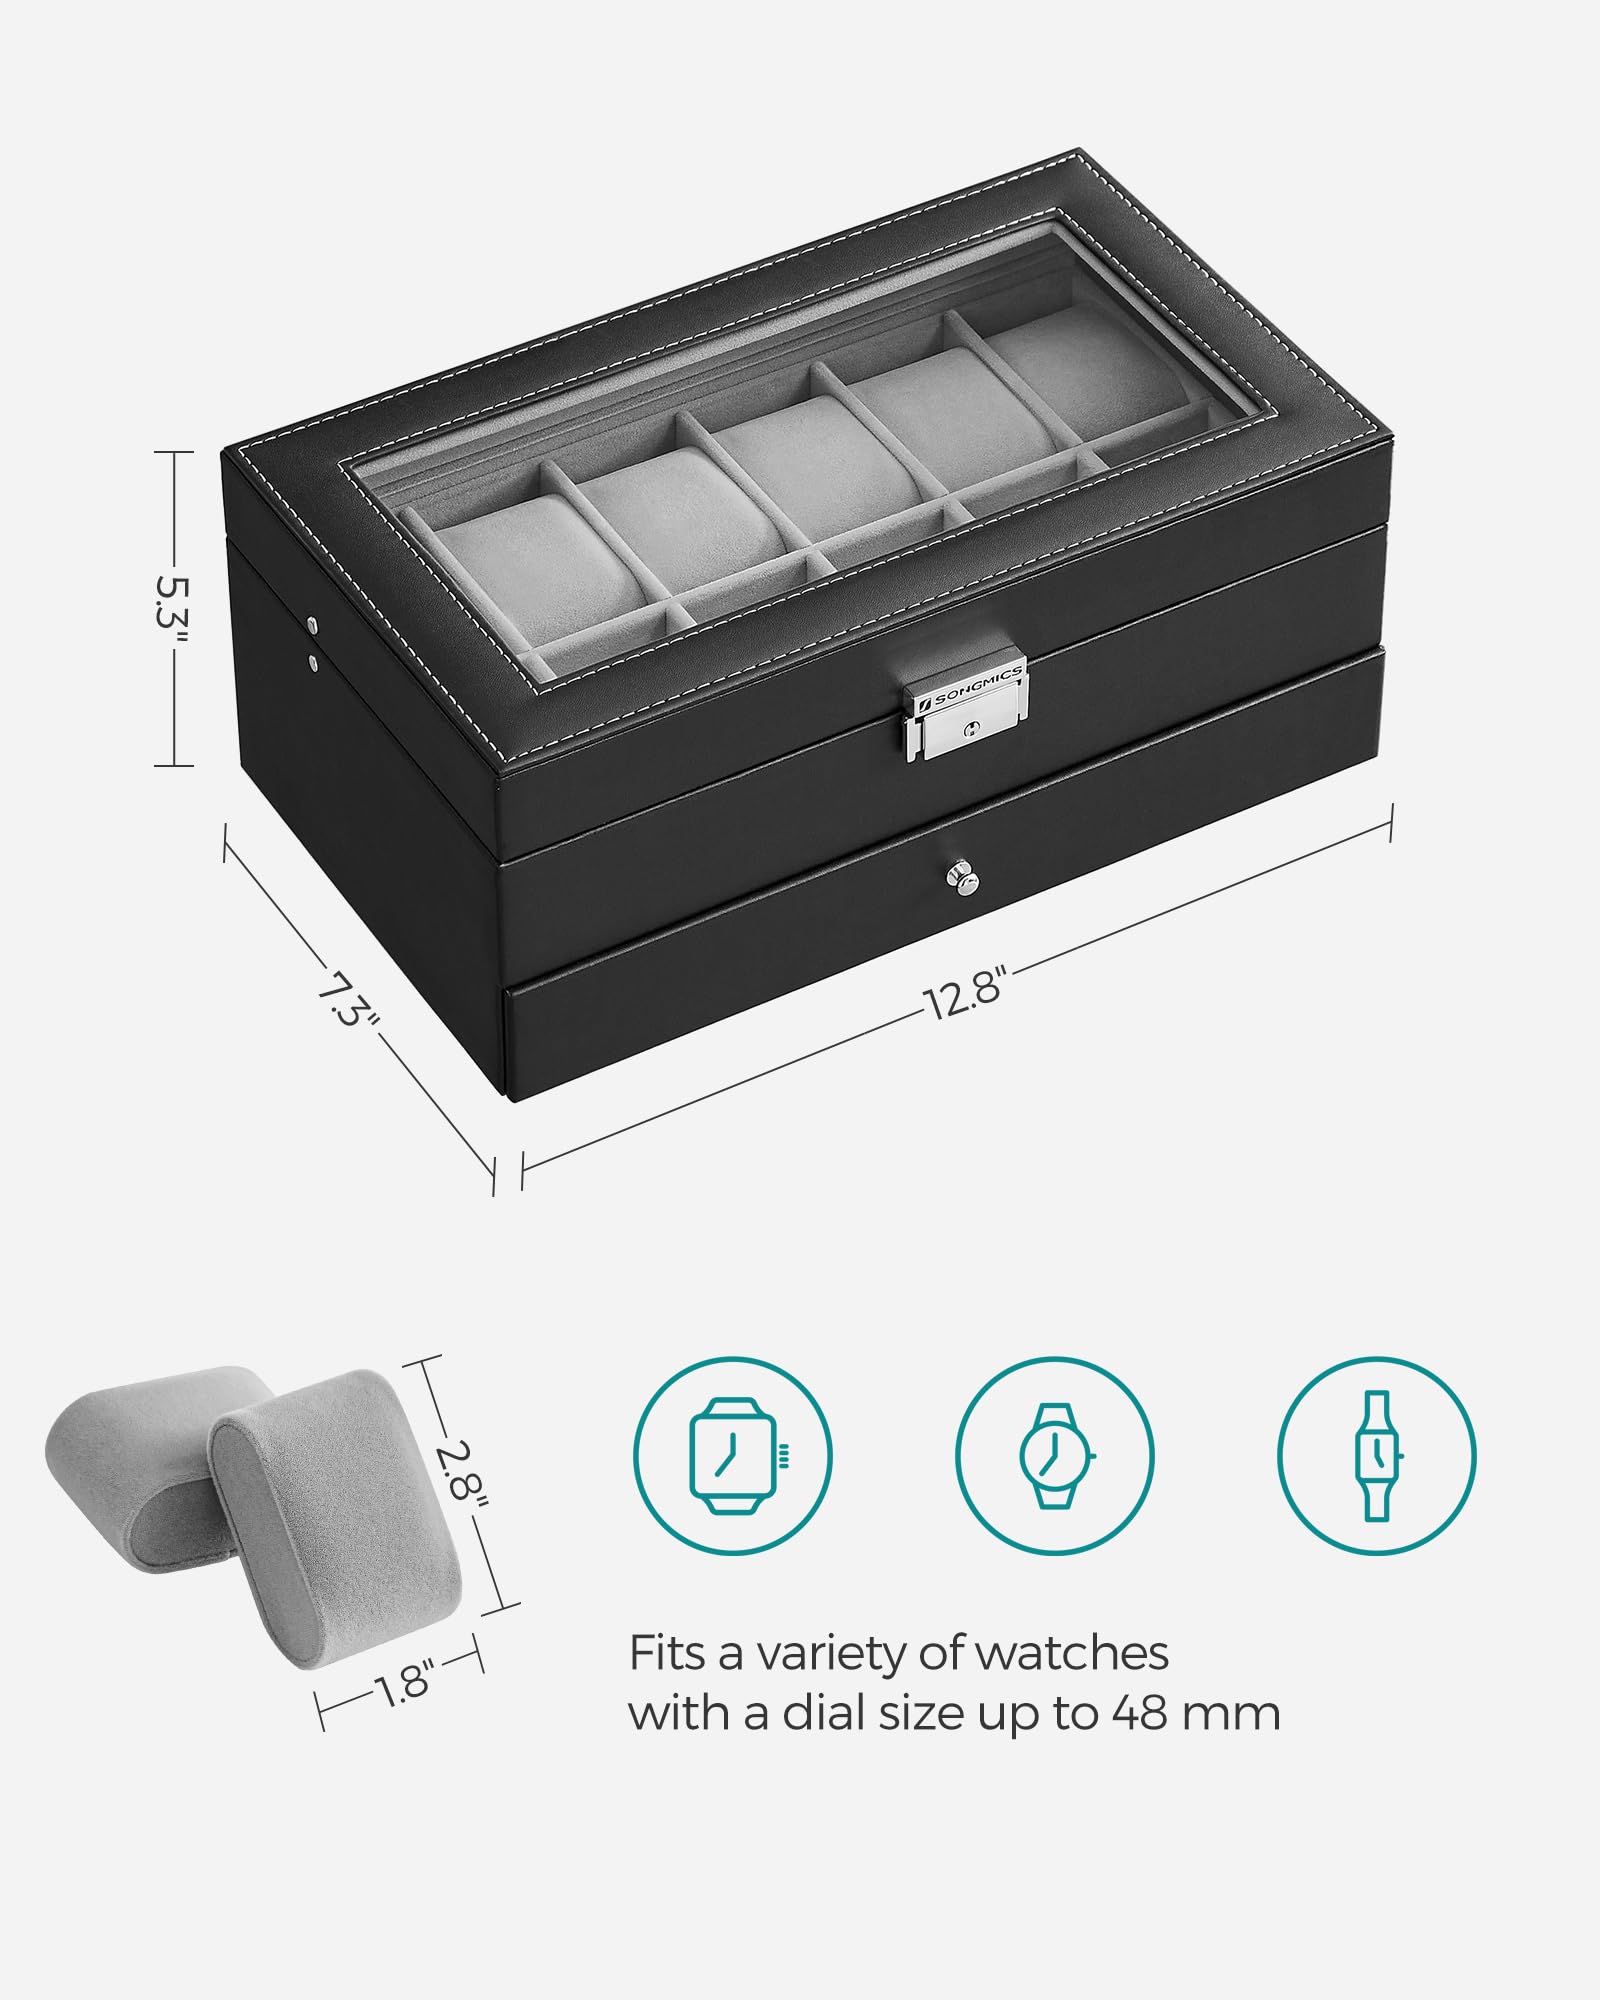 SONGMICS 12-Slot Watch Box, Lockable Watch Case with Glass Lid, 2 Layers, with 1 Drawer for Rings, Bracelets, Gift Idea, Black Synthetic Leather, Gray Lining UJWB012